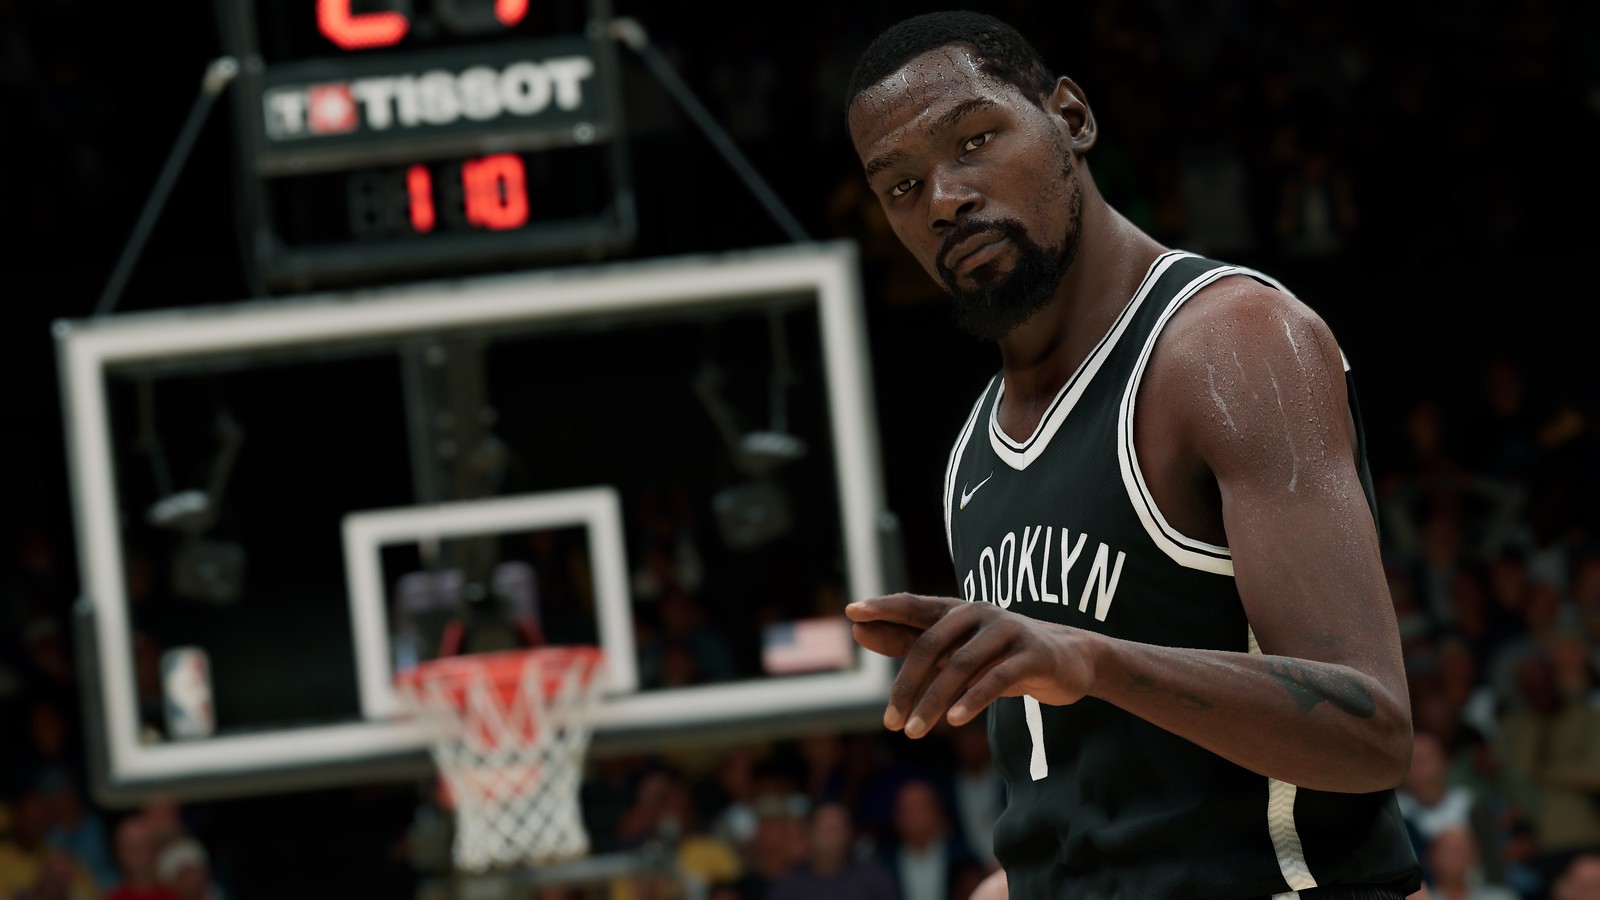 Kevin Durant of the Brooklyn Nets gestures to the camera in front of a basketball goal